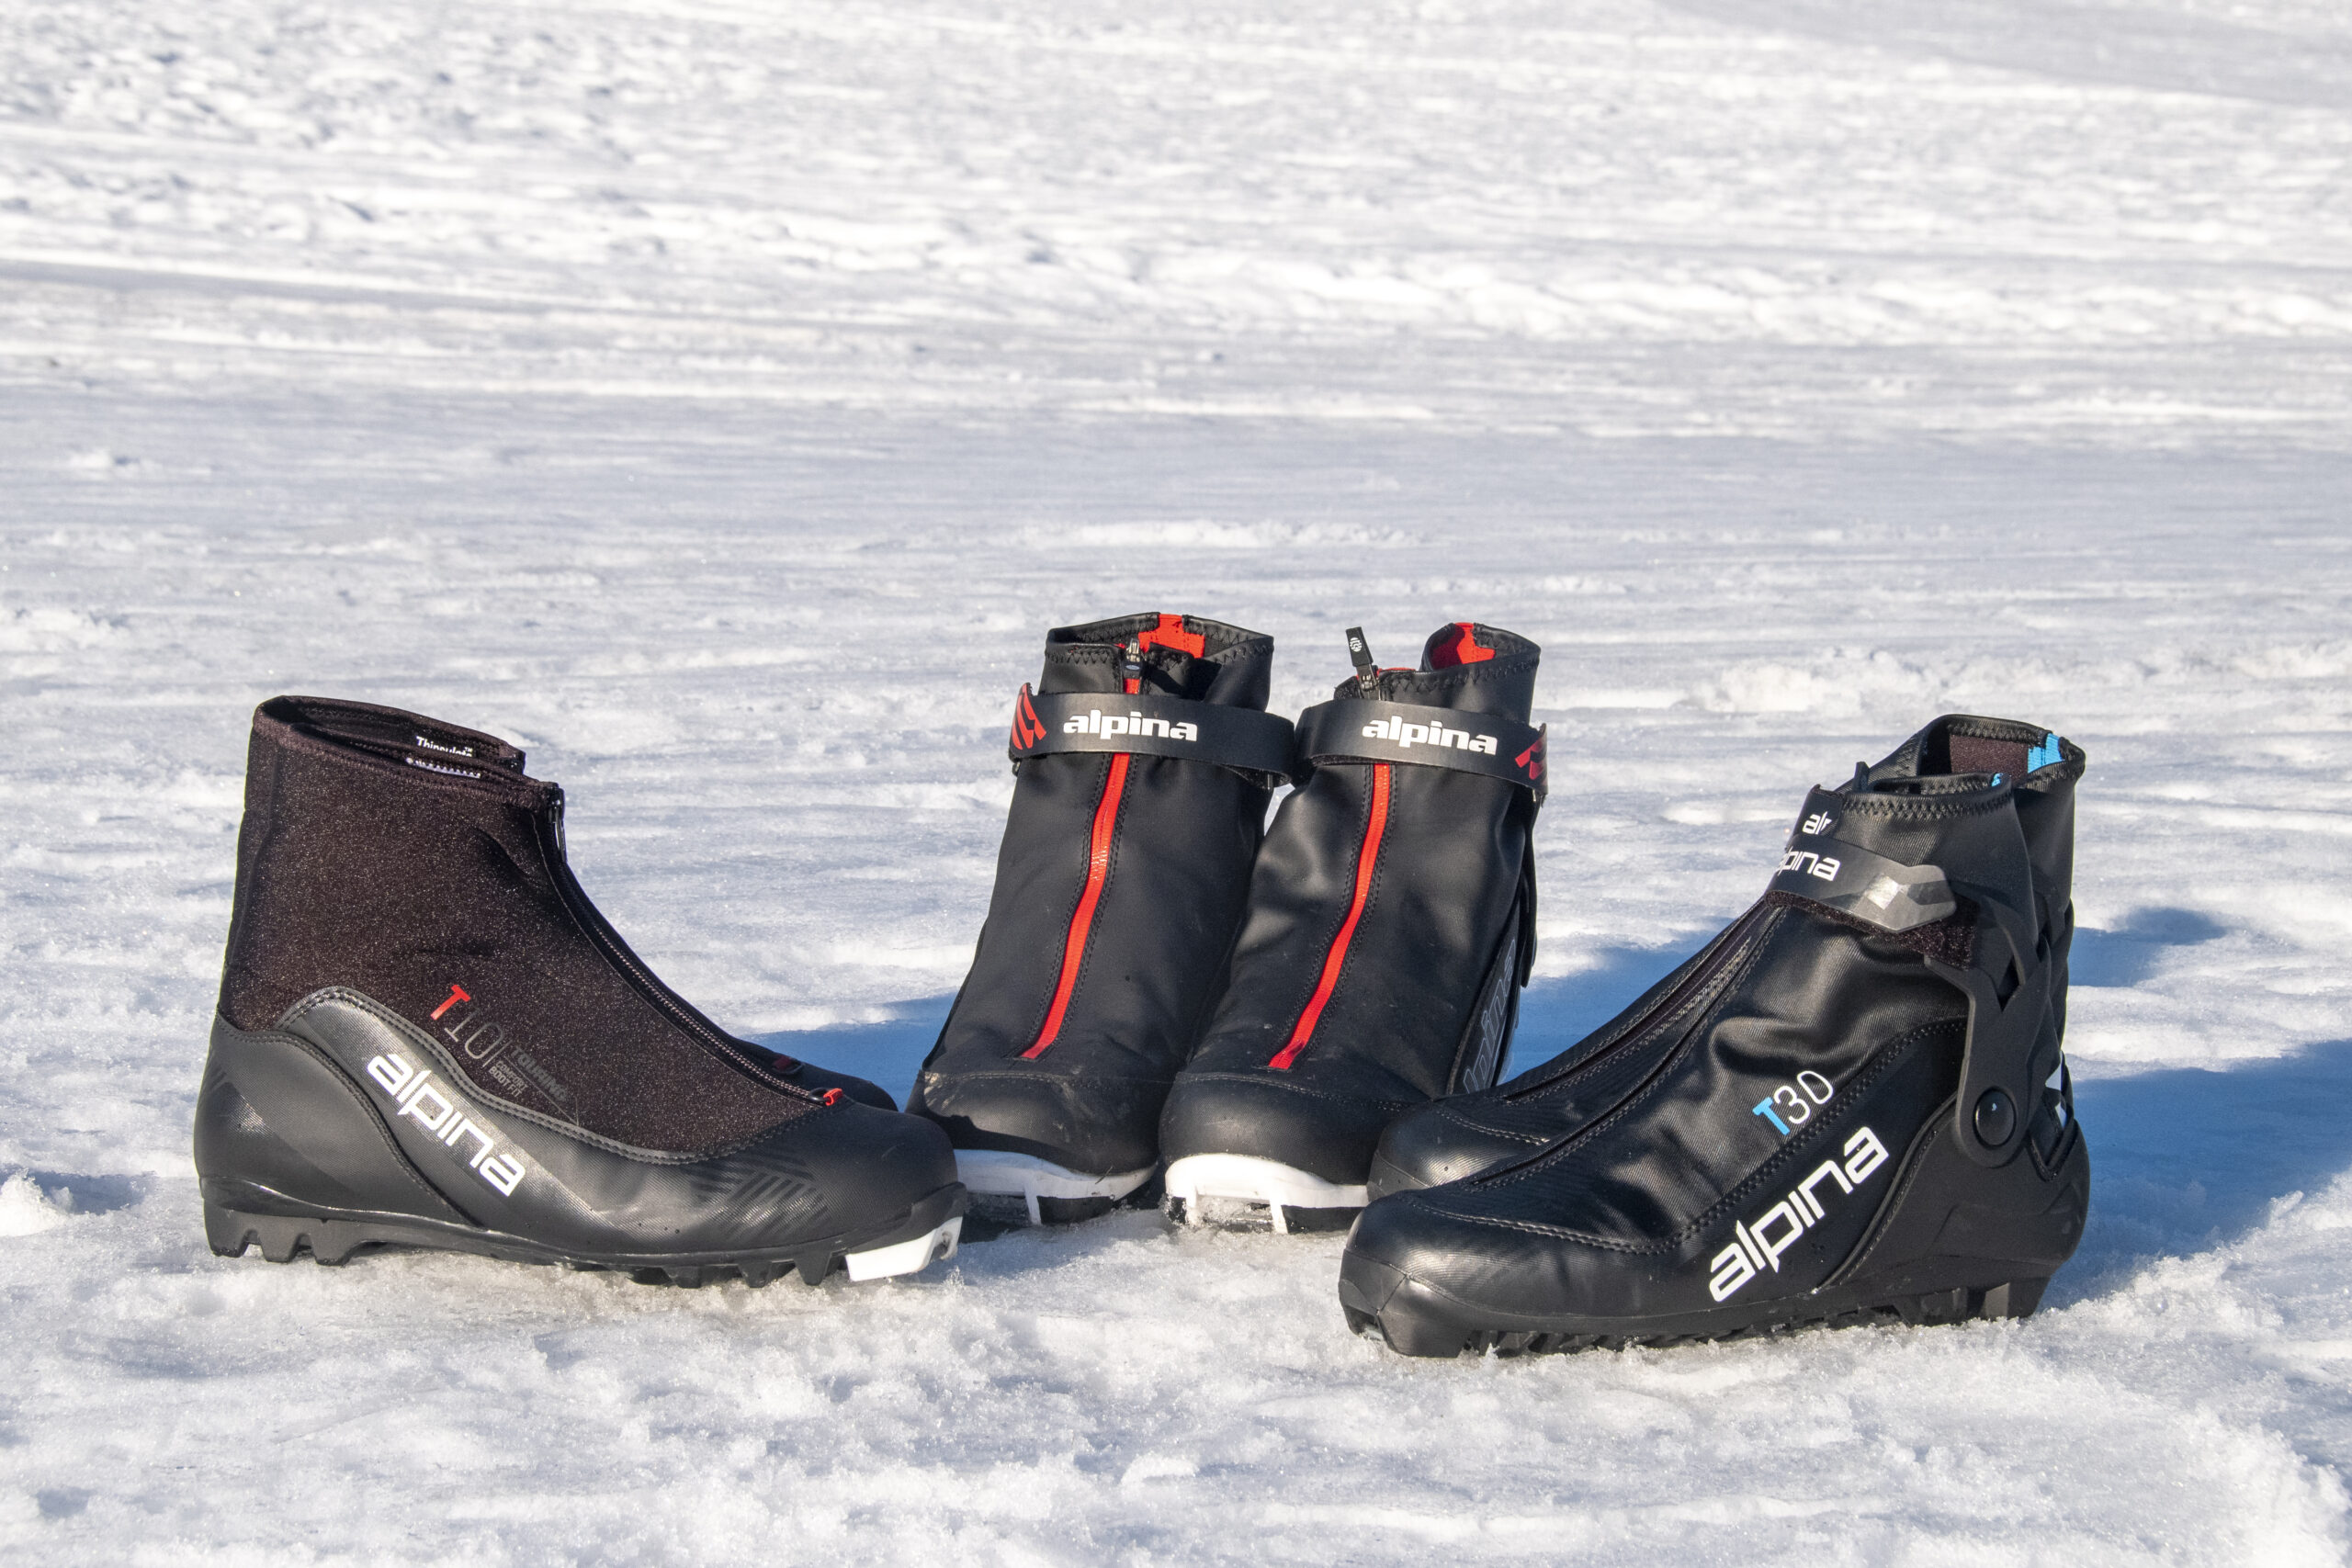 Different shoes for cross country skiing, rental.